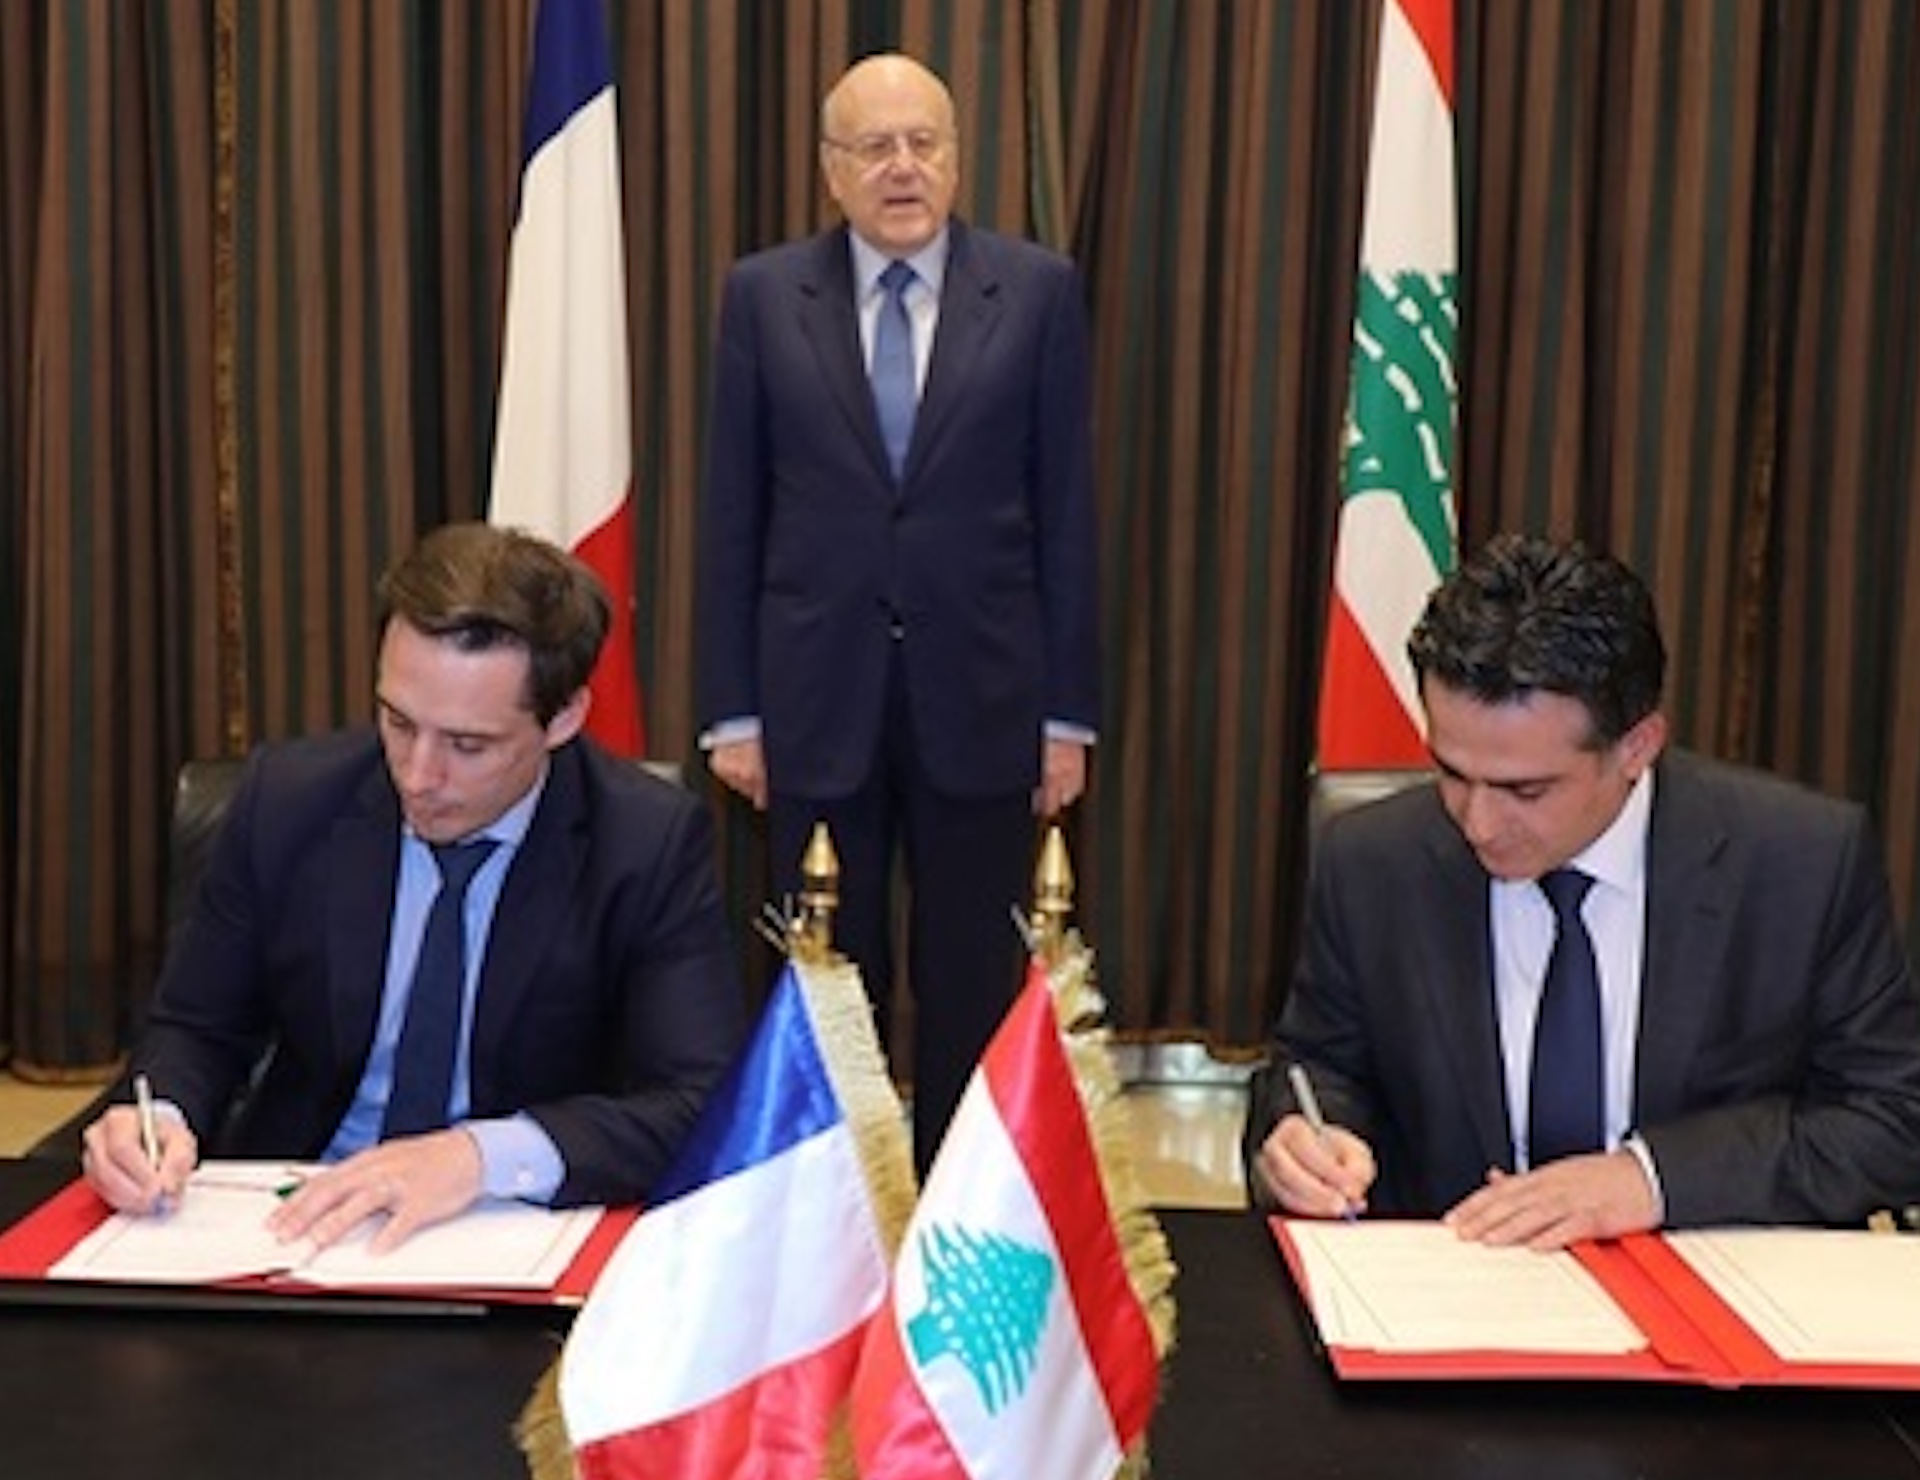 France to donate buses to Lebanon as part of Integrated Transport Plan